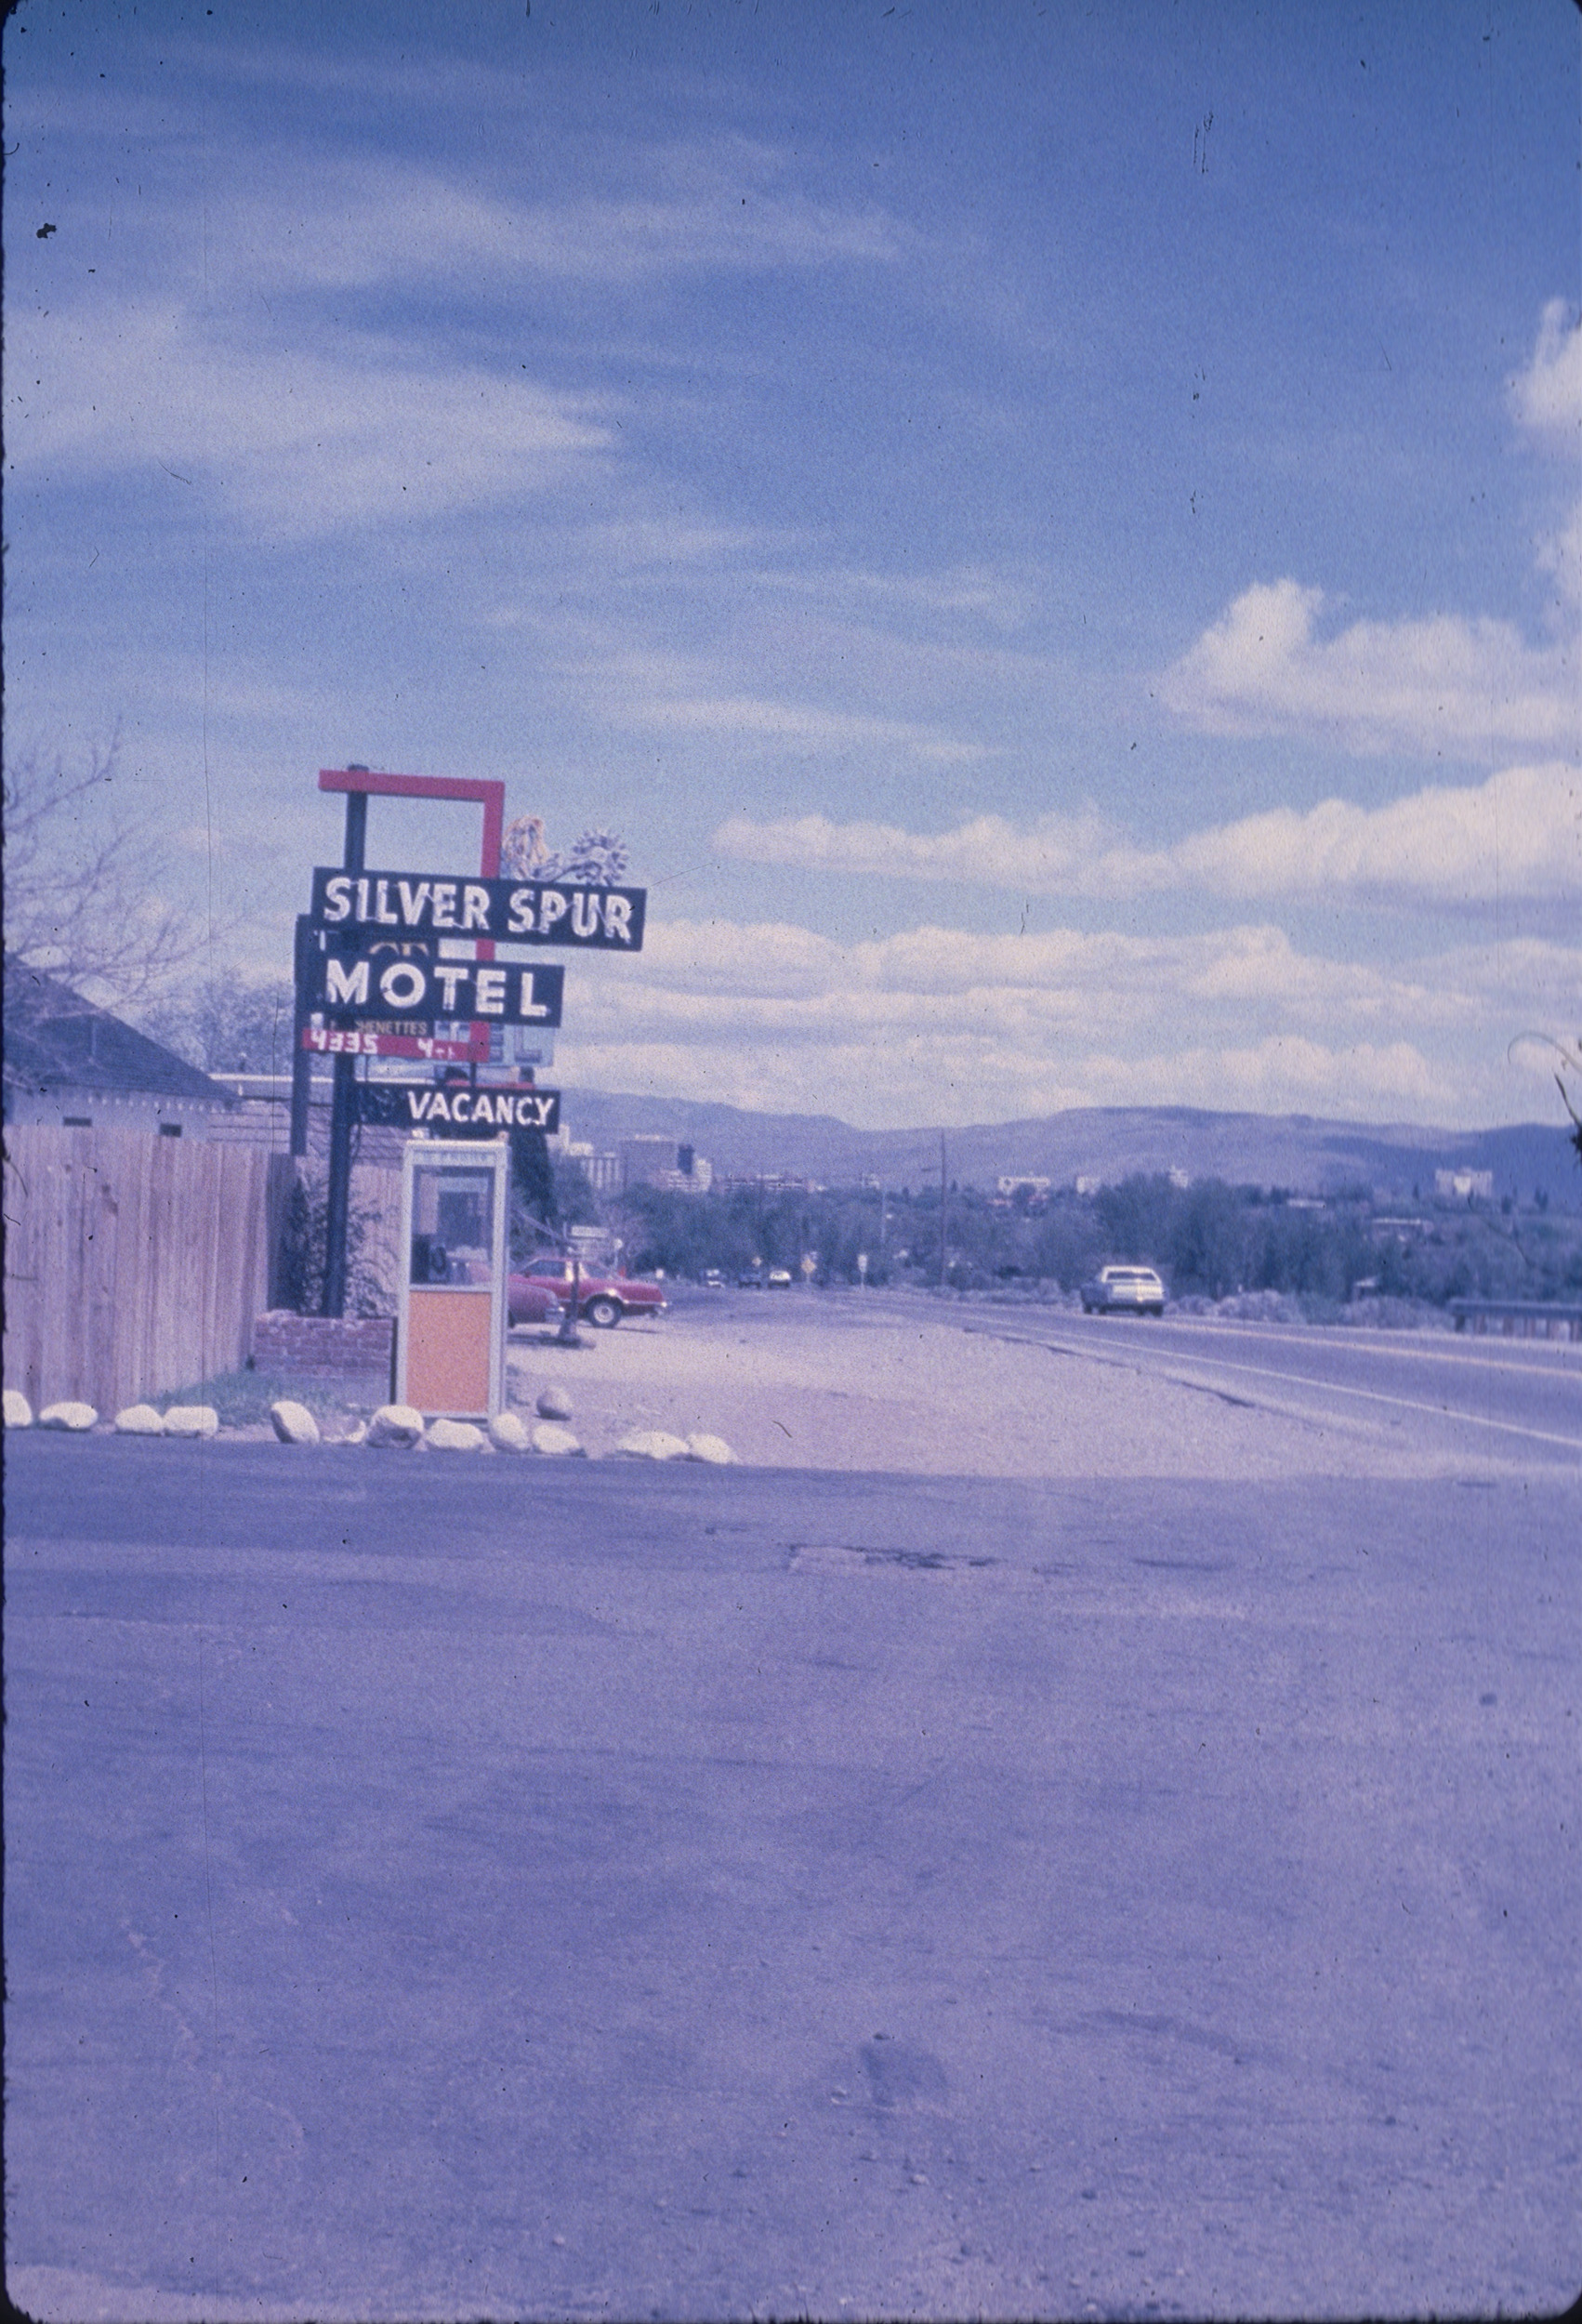 Slide of the neon sign for the Silver Spur Motel, Reno, Nevada, 1986